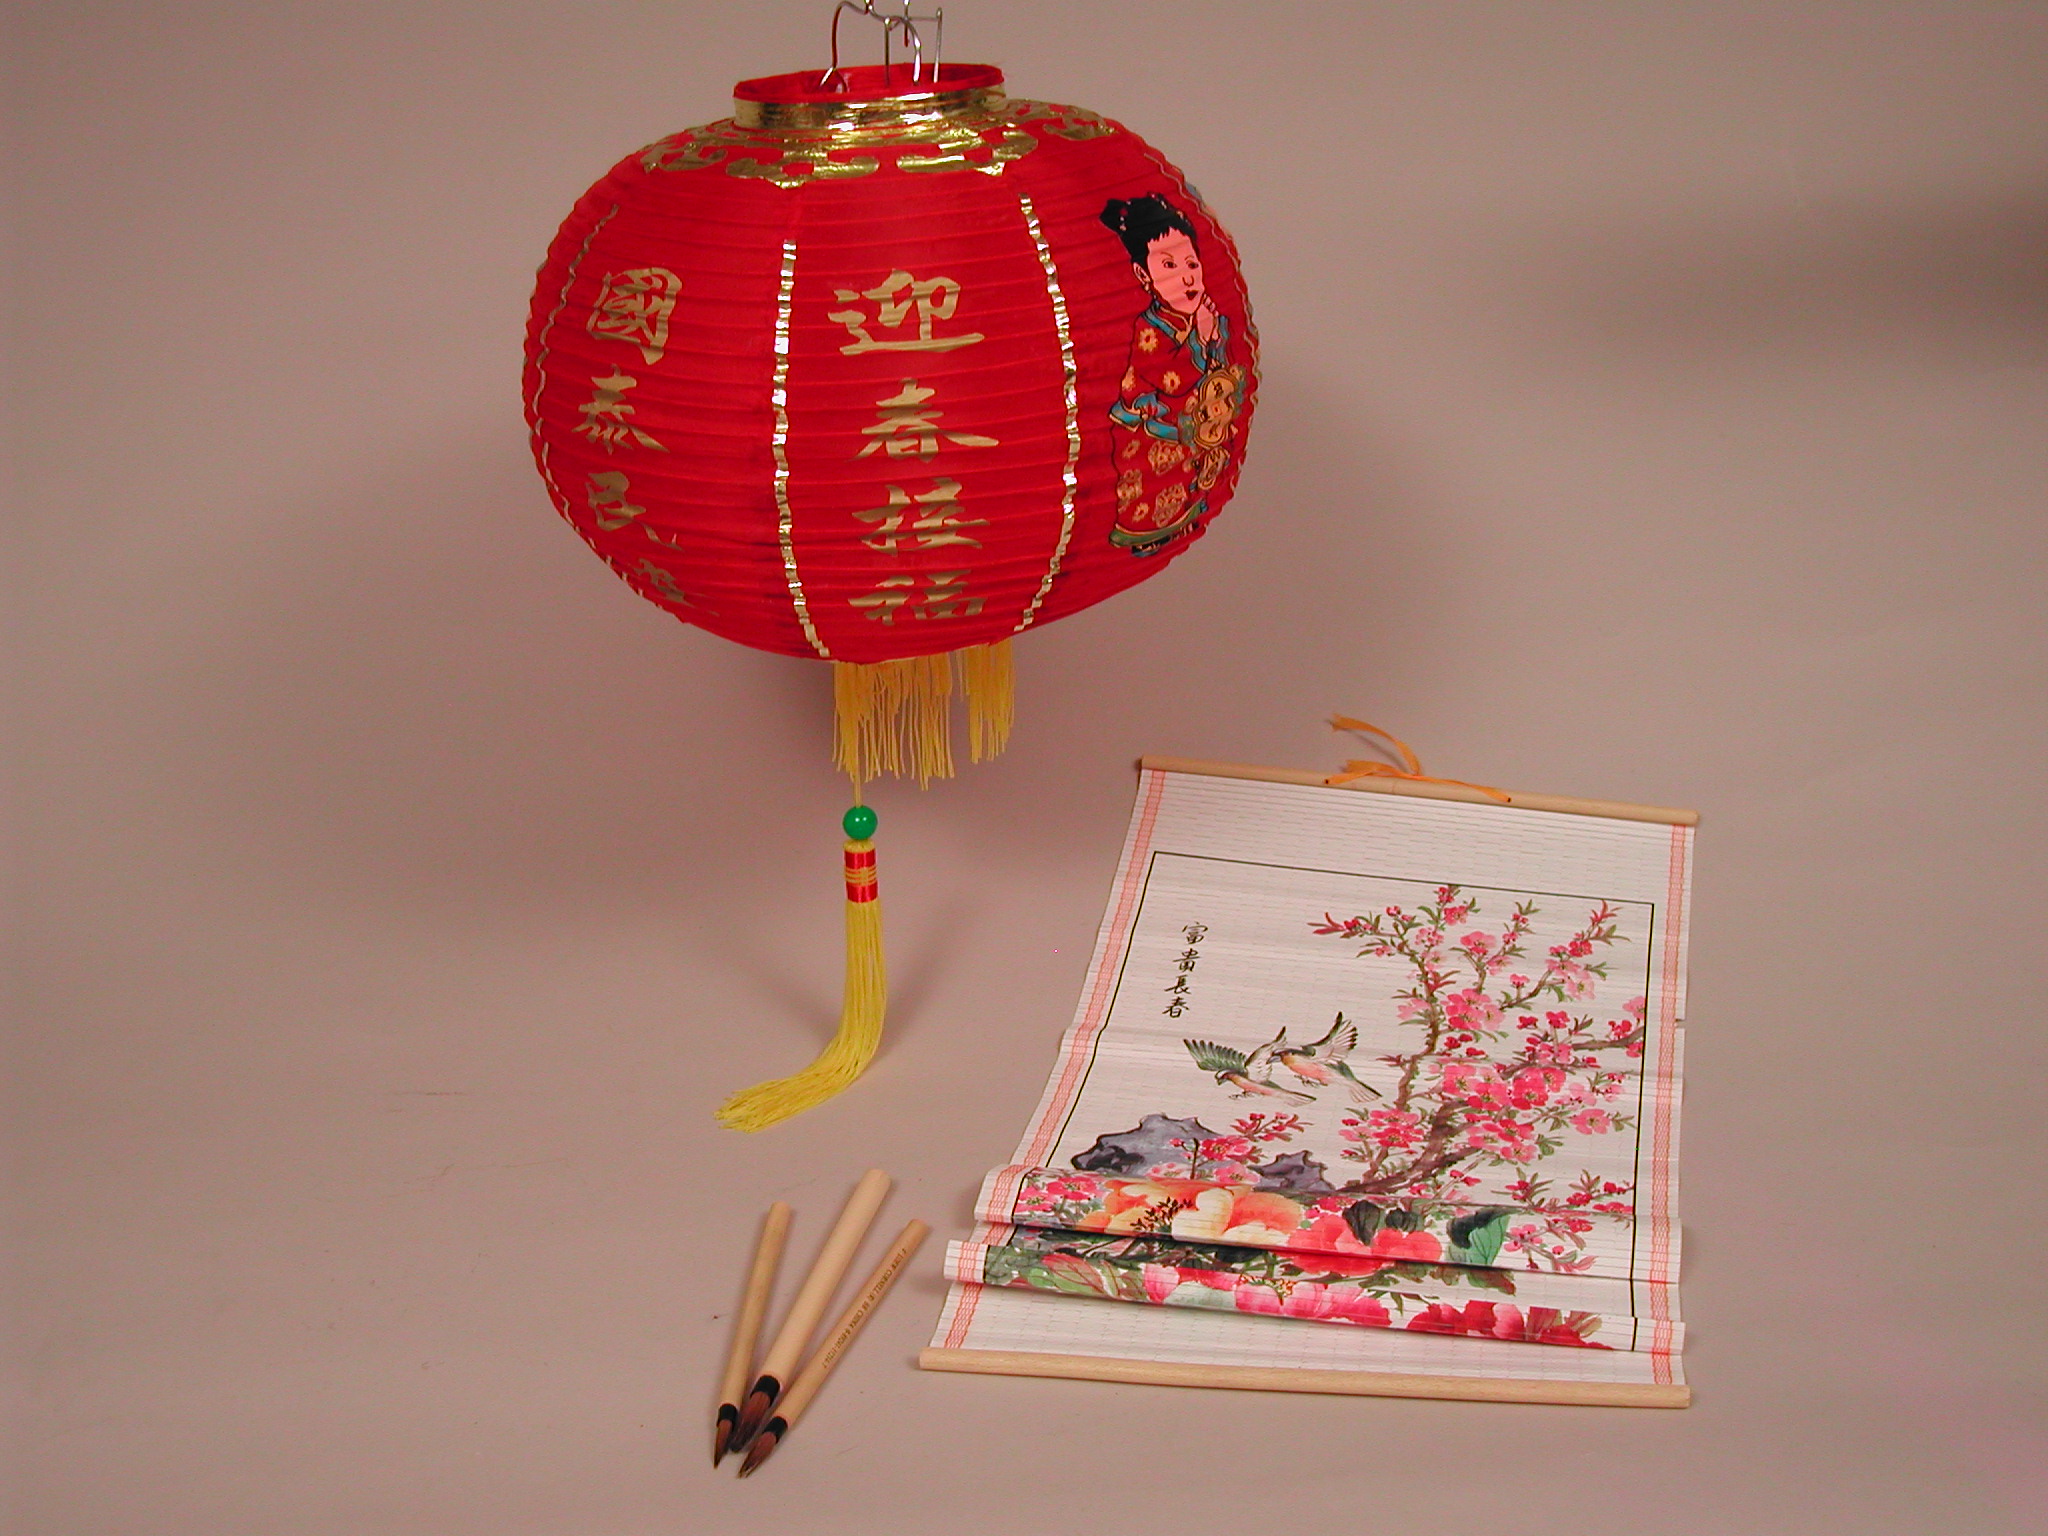 Chinese lantern and wall hanging, from East Meets West